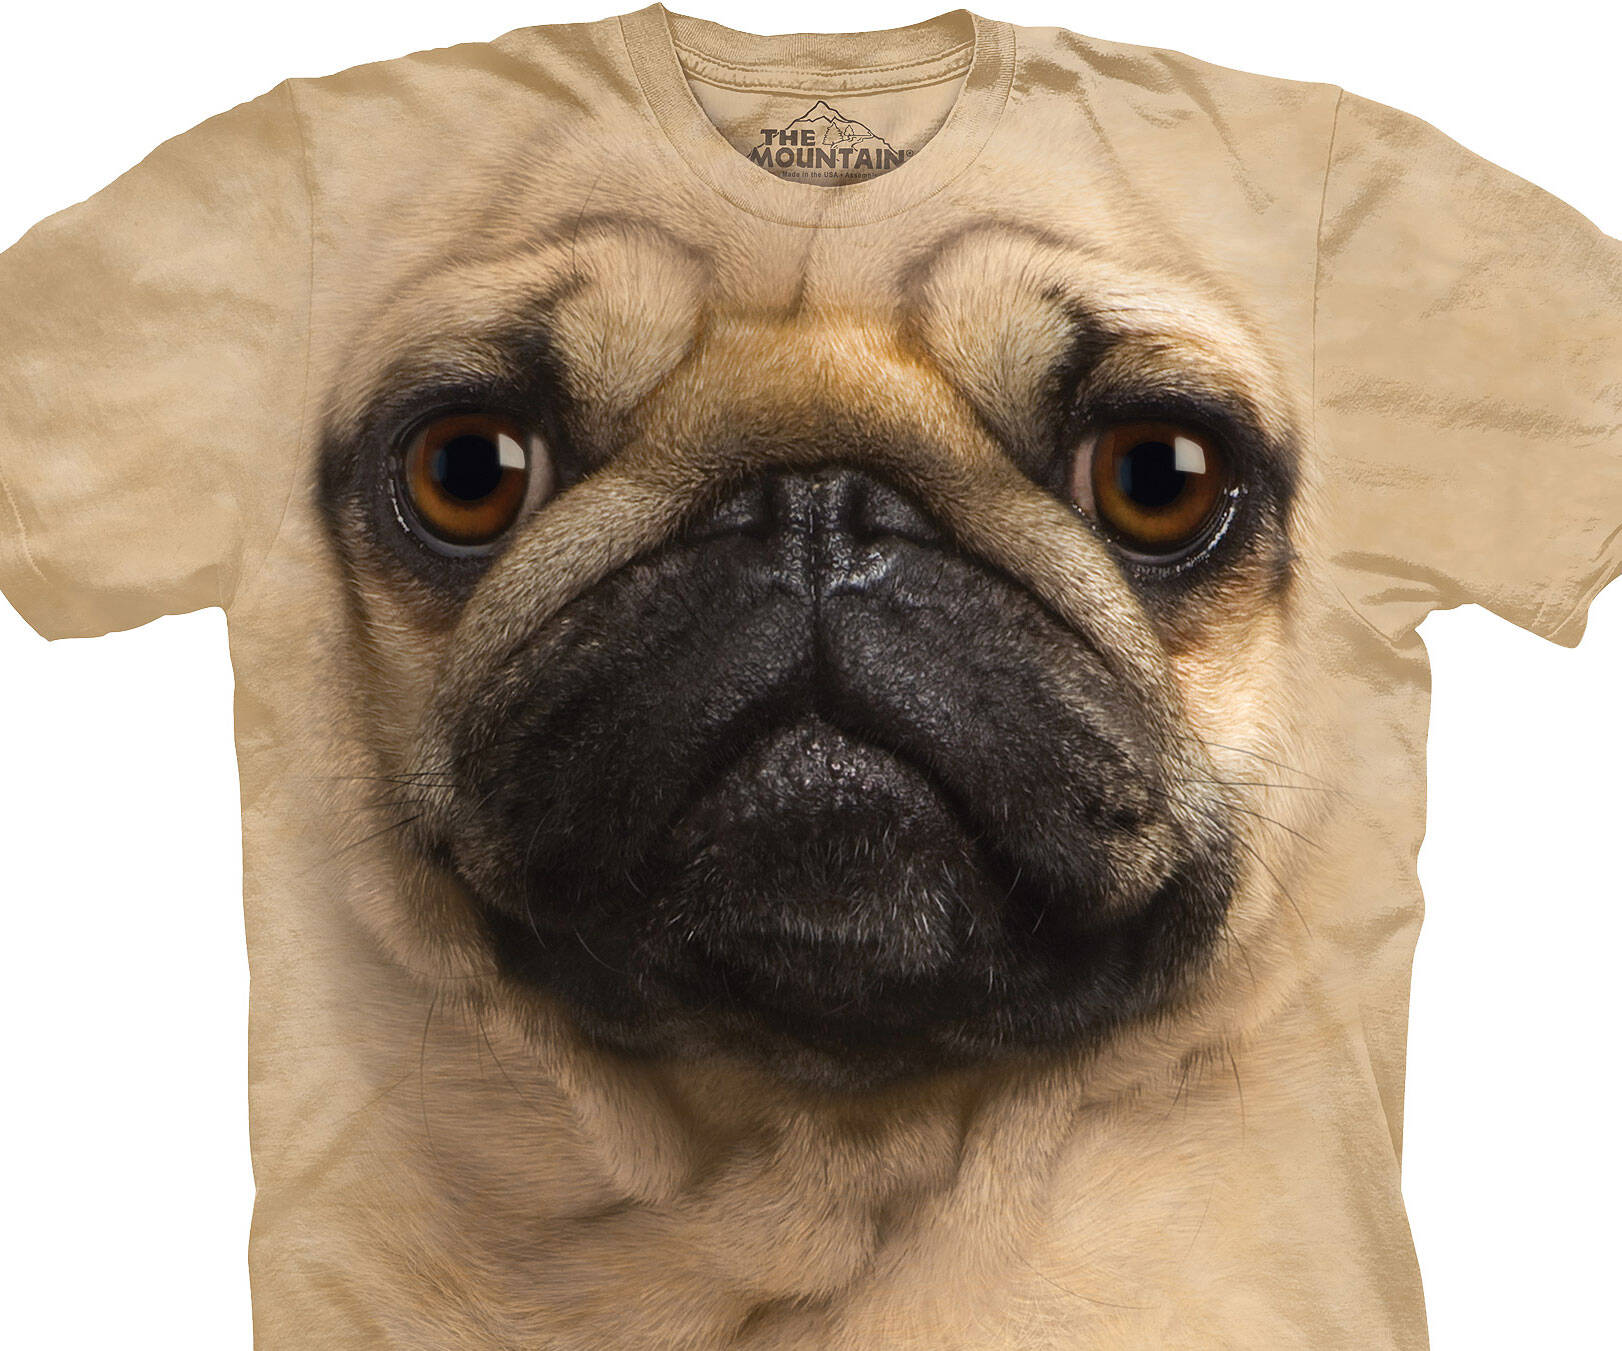 Pug Face Shirt - coolthings.us